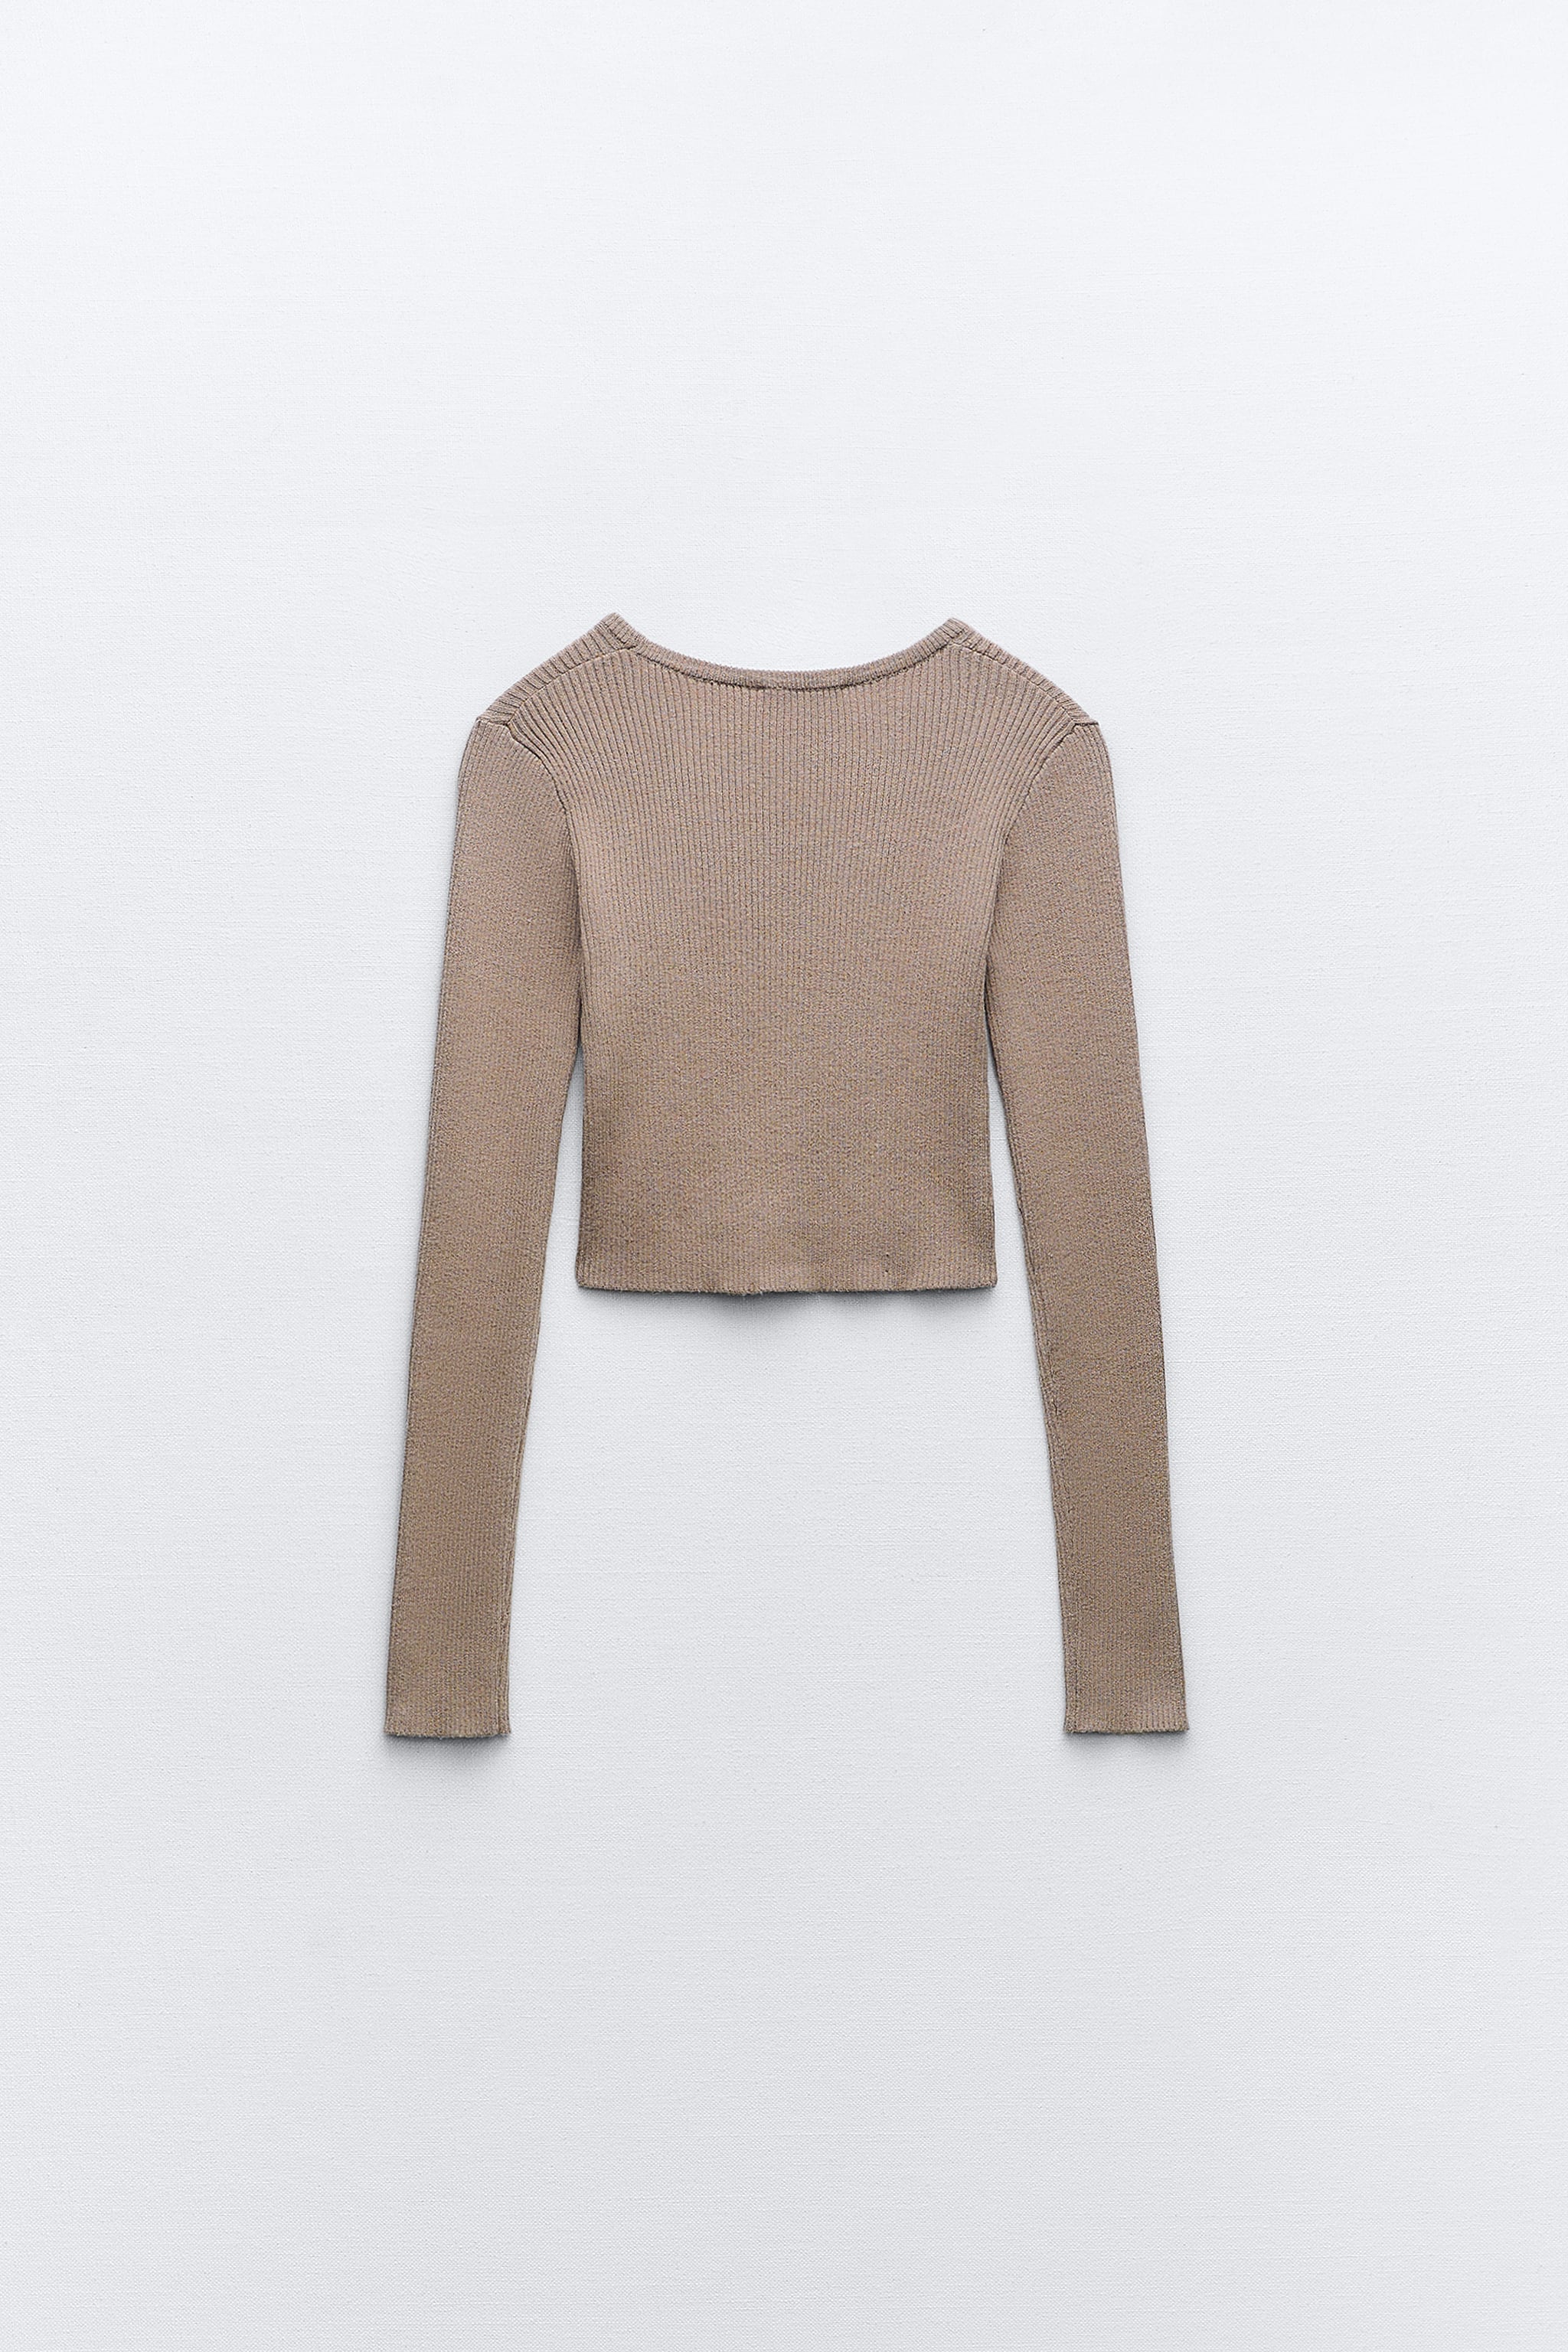 SOFT TOUCH CROP RIB SWEATER